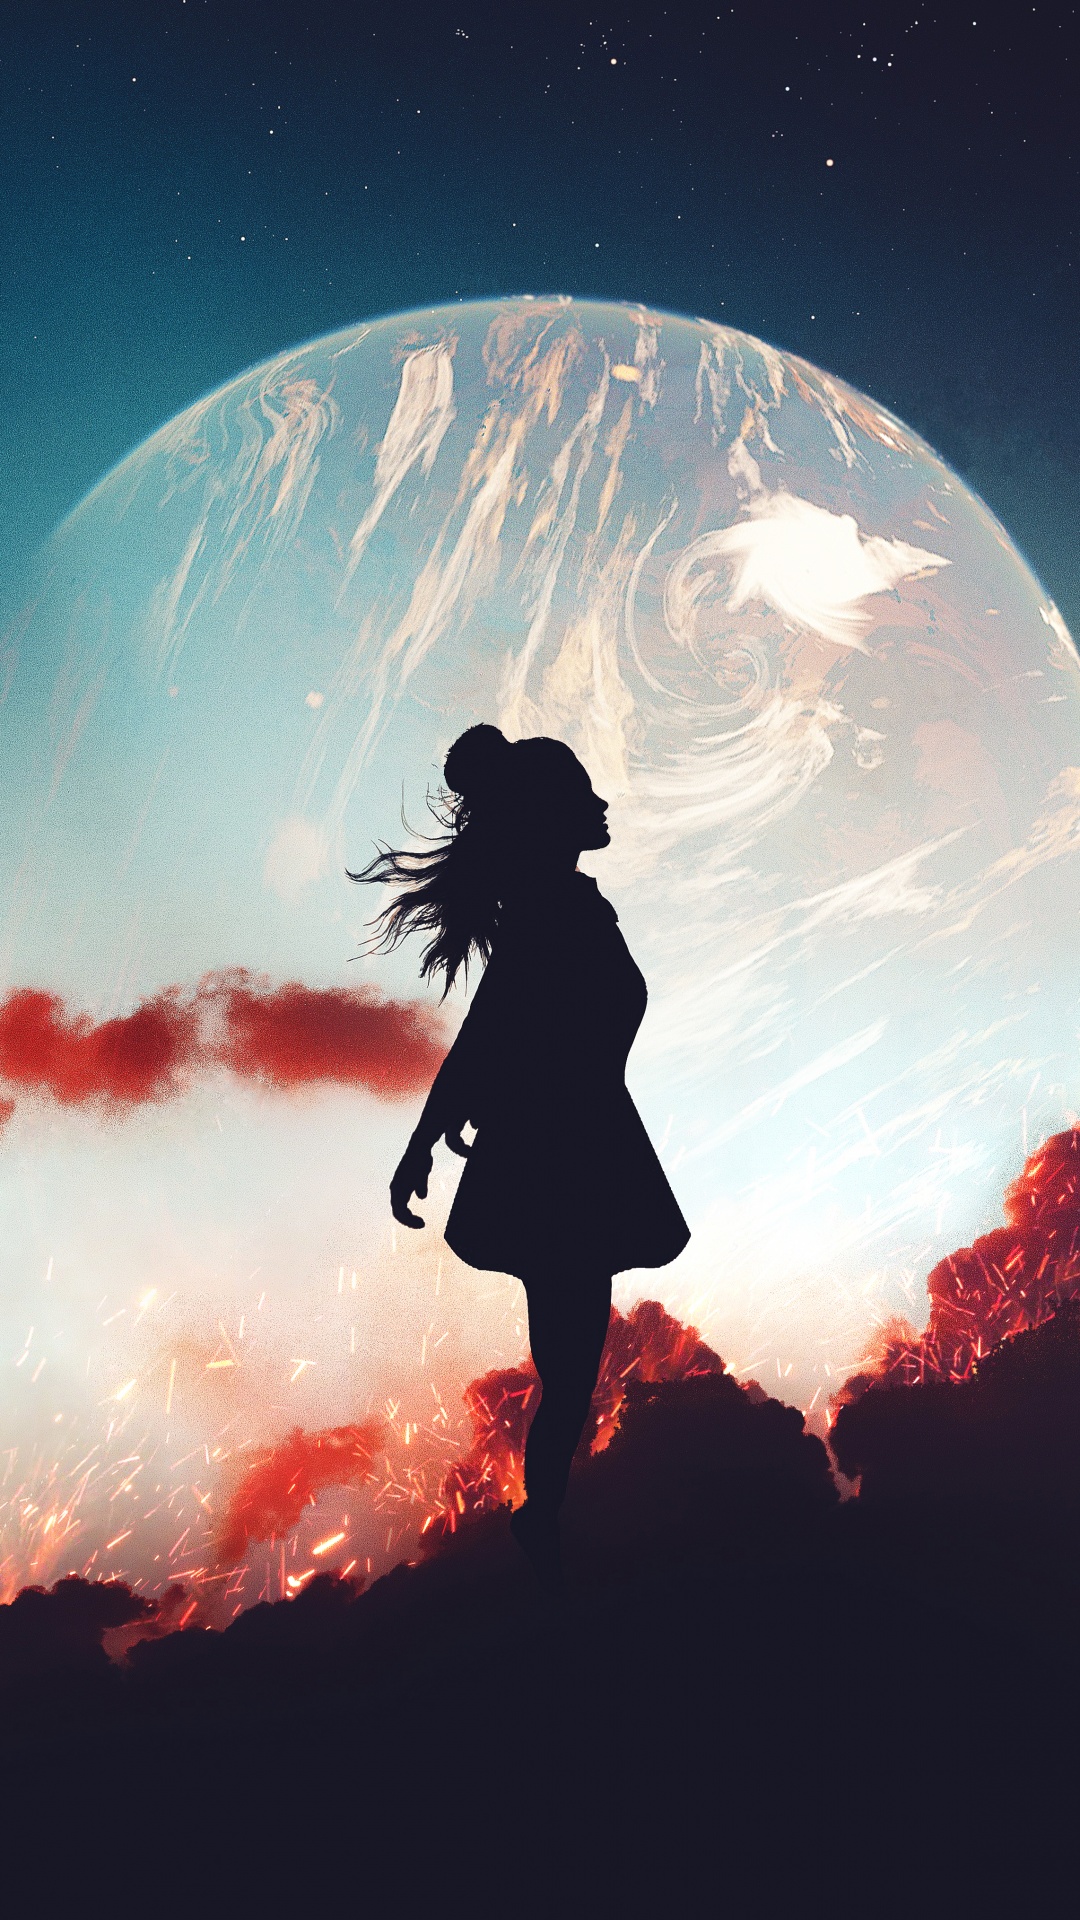 https://4kwallpapers.com/images/wallpapers/alone-girl-silhouette-mood-planet-dream-1080x1920-1139.jpg